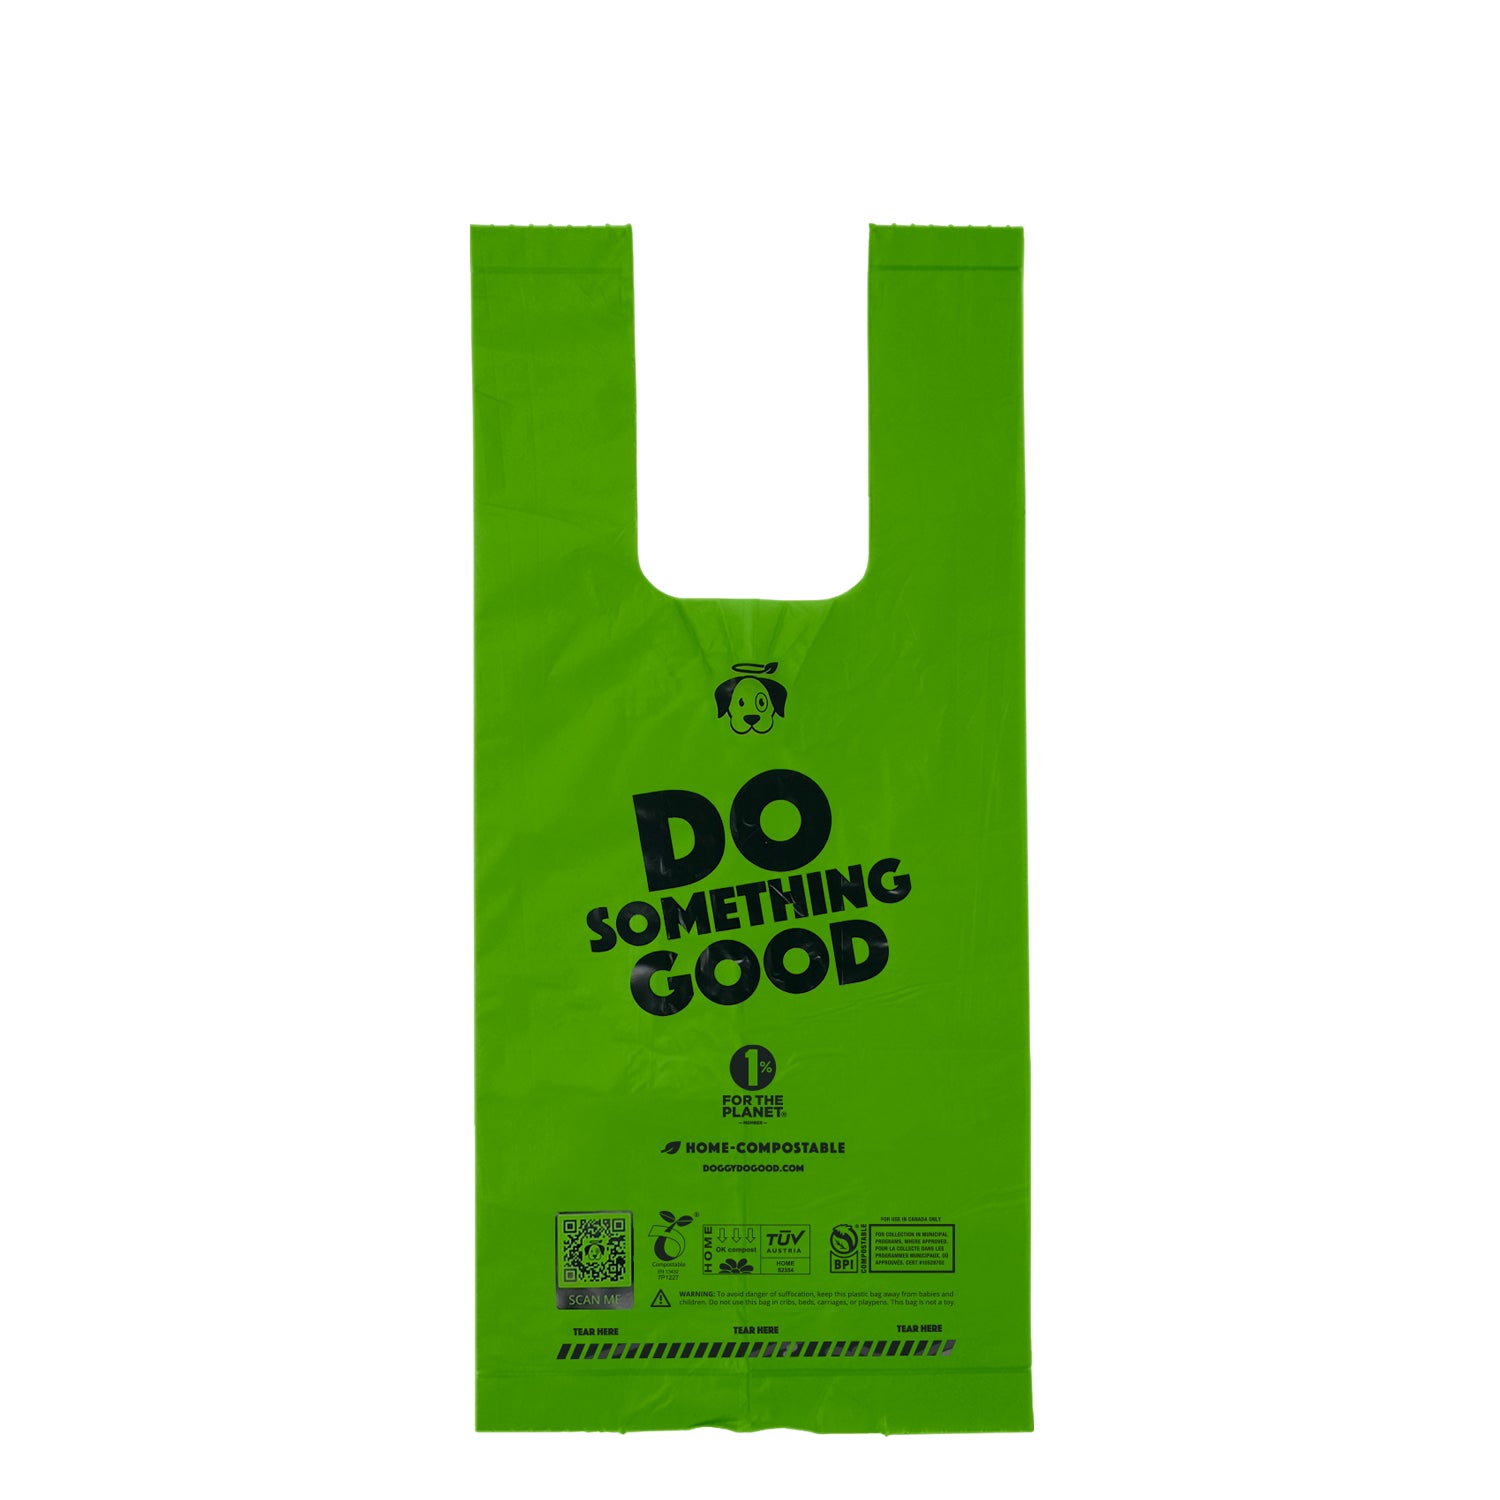 Home Compostable Small Rolled Handle Bags (180 Bags)